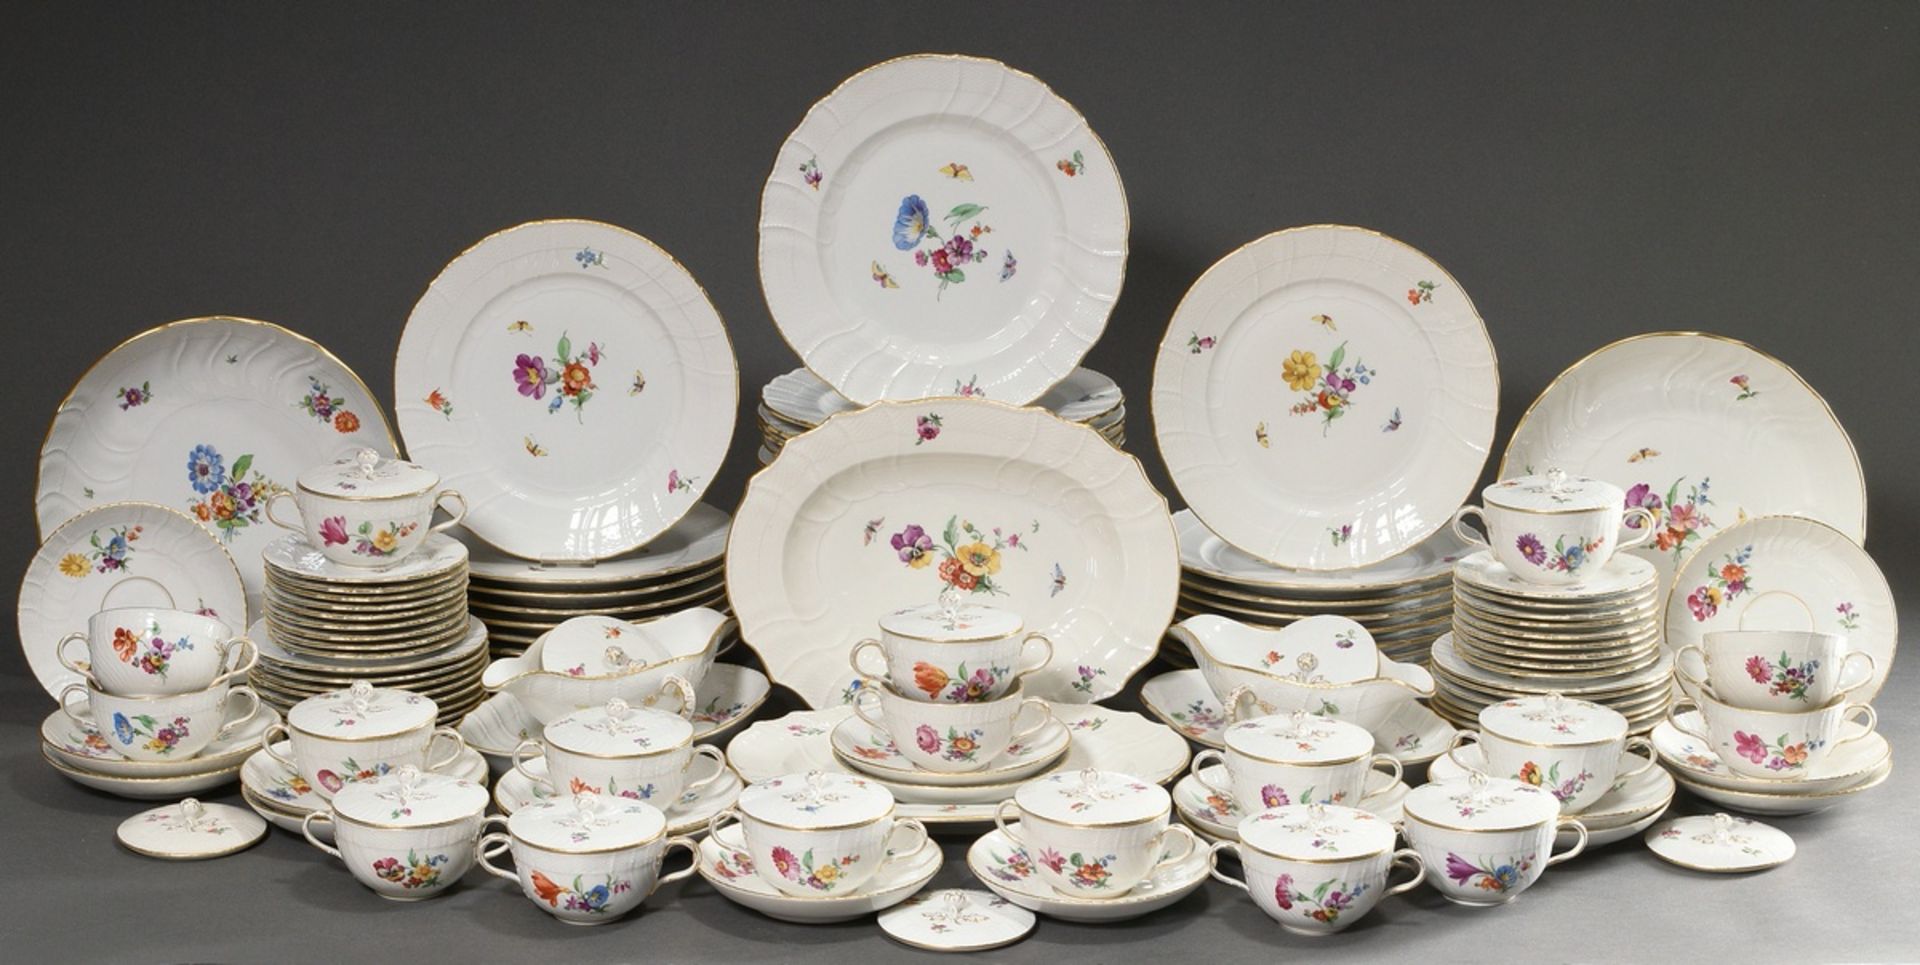 114 pieces KPM dinner service "Neuosier" with polychrome painting "flowers and insects" consisting  - Image 3 of 14